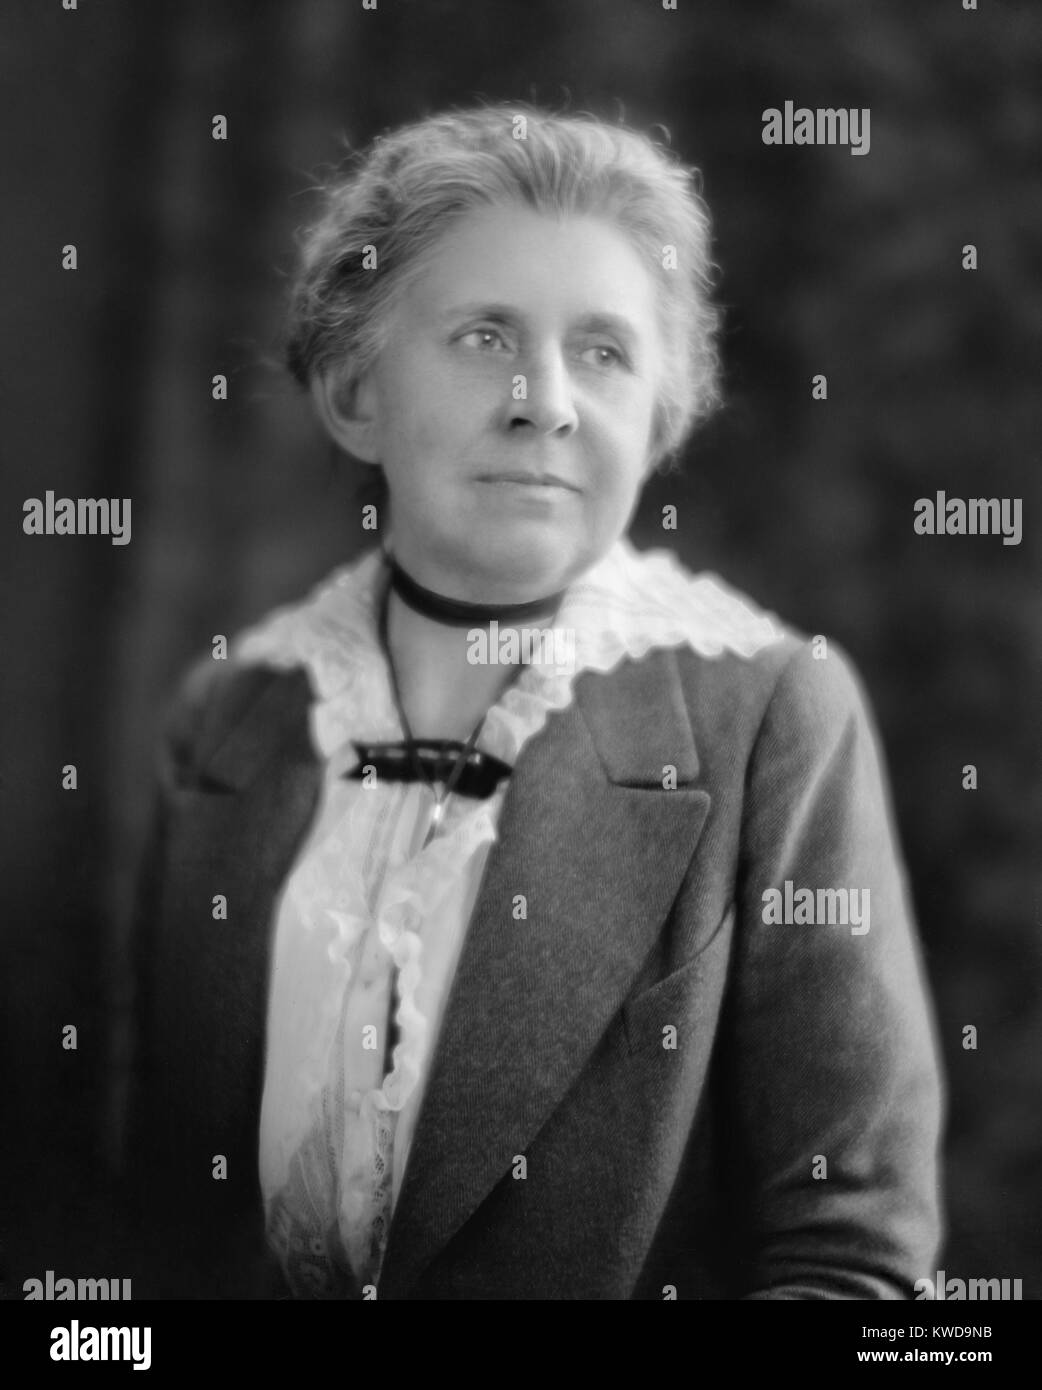 Ida Tarbell ca. 1910-1920, after her 'muckraking' years at McClure's magazine. In the 1910s and 1920 she wrote longer works including: THE TARIFF OF OUT TIMES, 1912; THE BUSINESS OF BEING A WOMAN, 1912; THE WAYS OF WOMAN, 1915; NEW IDEALS IN BUSINESS, 1916. (BSLOC_2015_17_182) Stock Photo